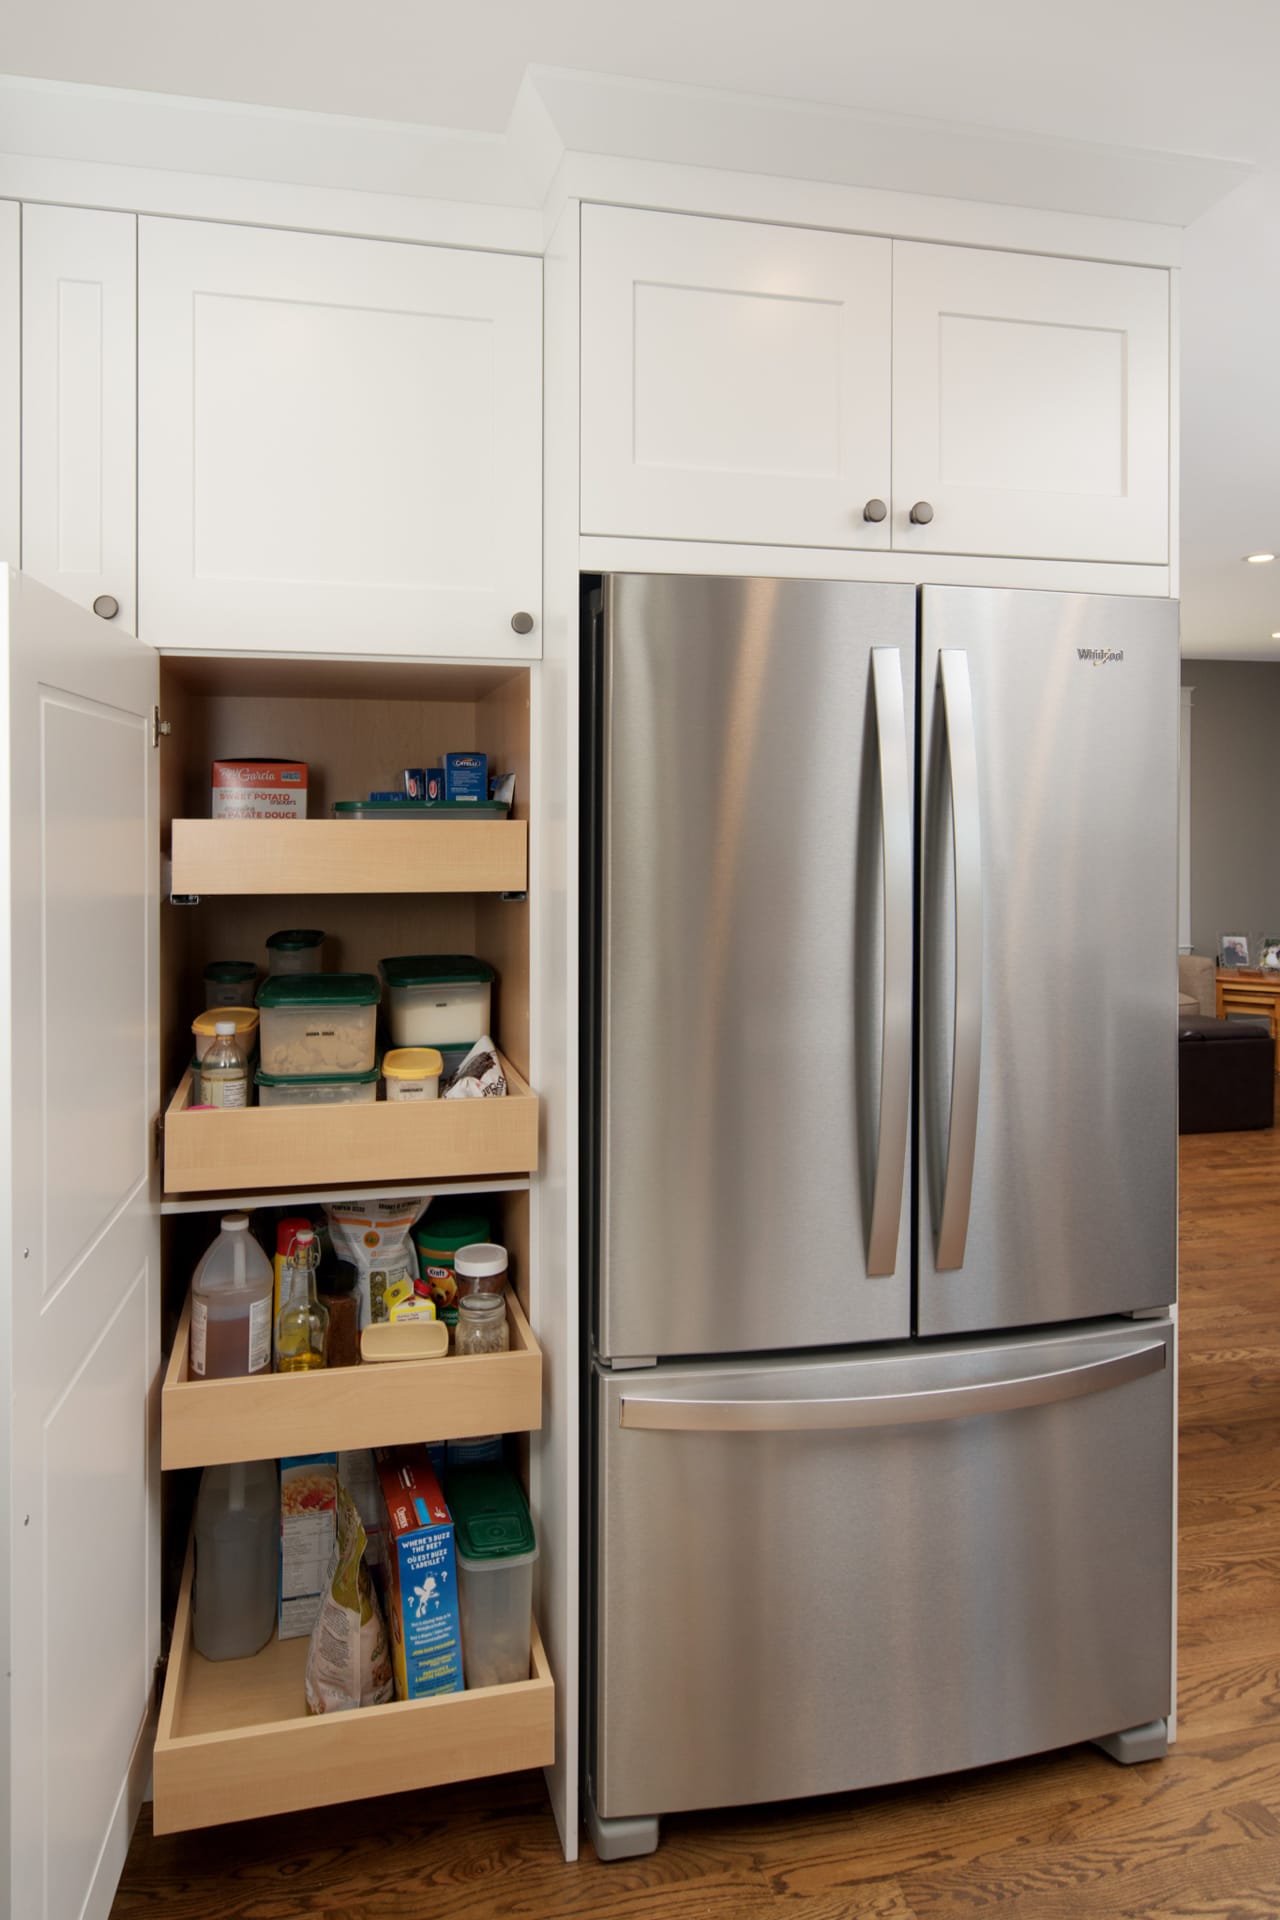 White shaker-style kitchen pantry with pull-out shelves beside a fridge.